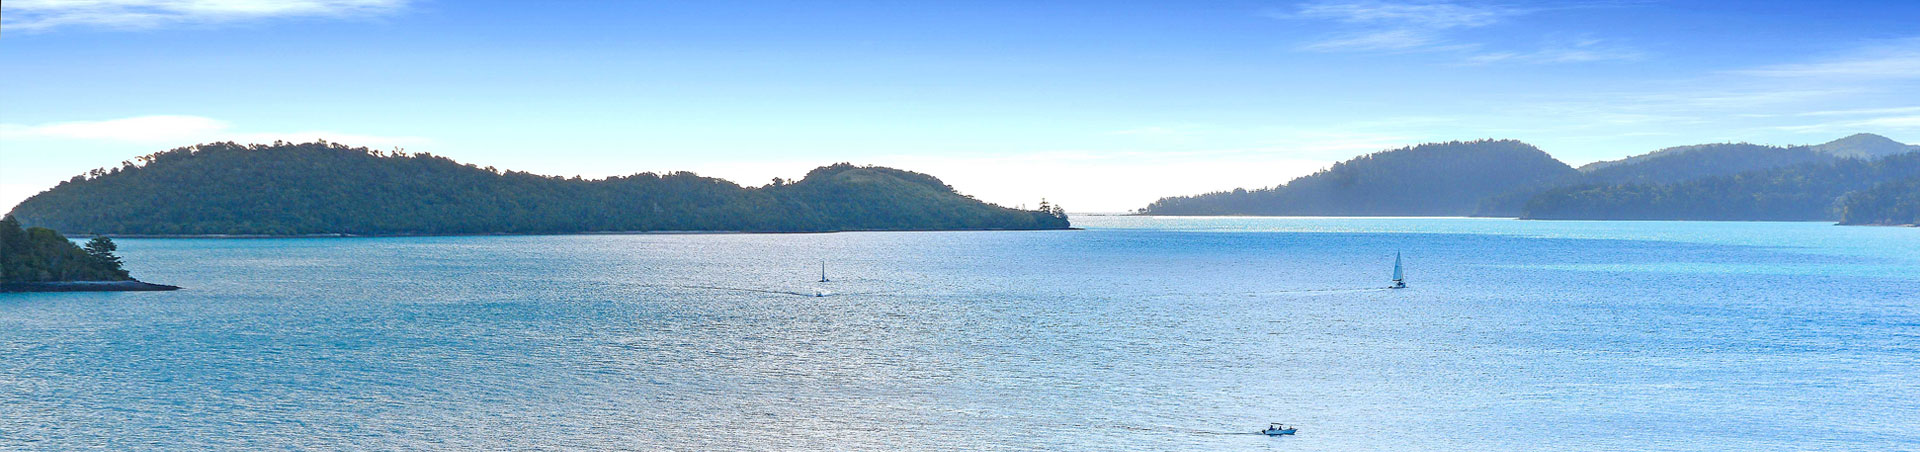 Our Reservation Consultant - Elise - Reviews Her Recent Stay At Hamilton Island